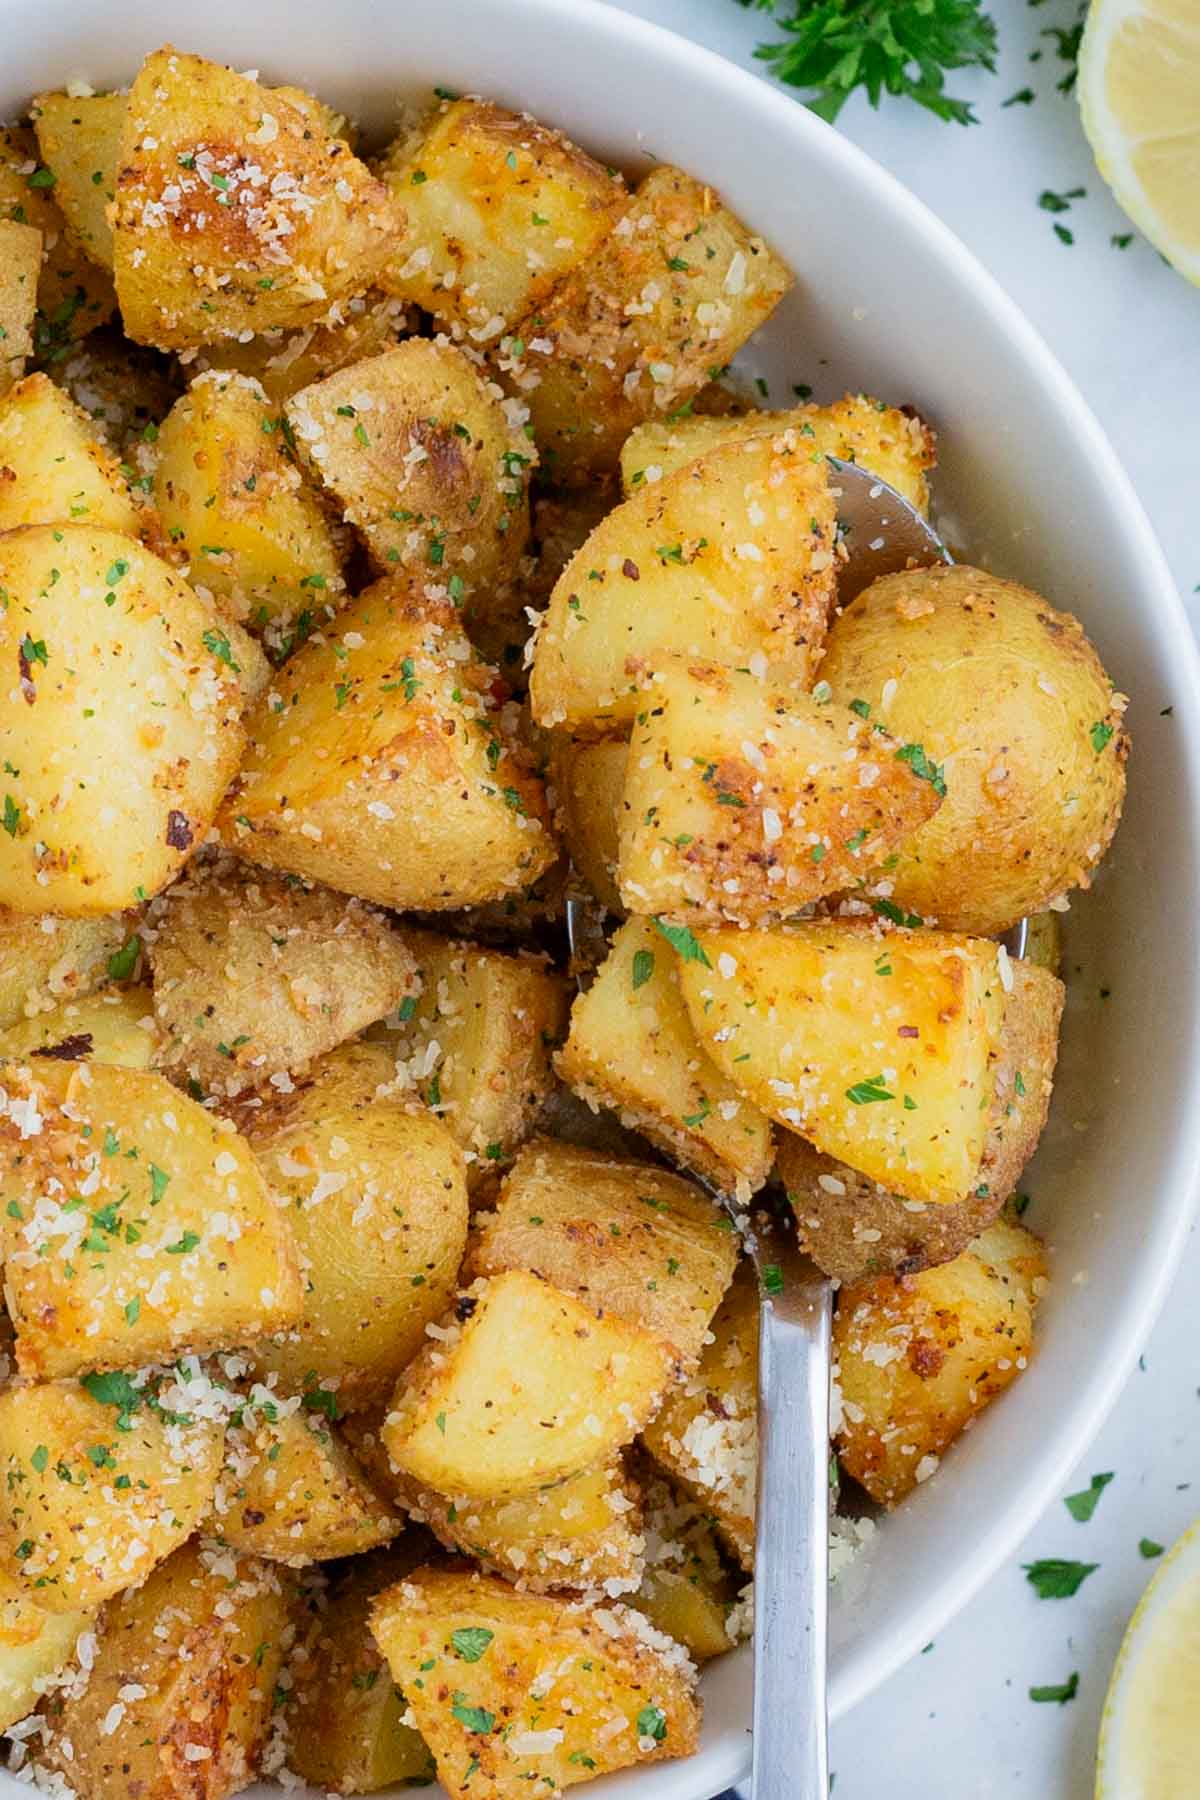 A spoon is used to scoop up roasted potatoes from a white bowl.